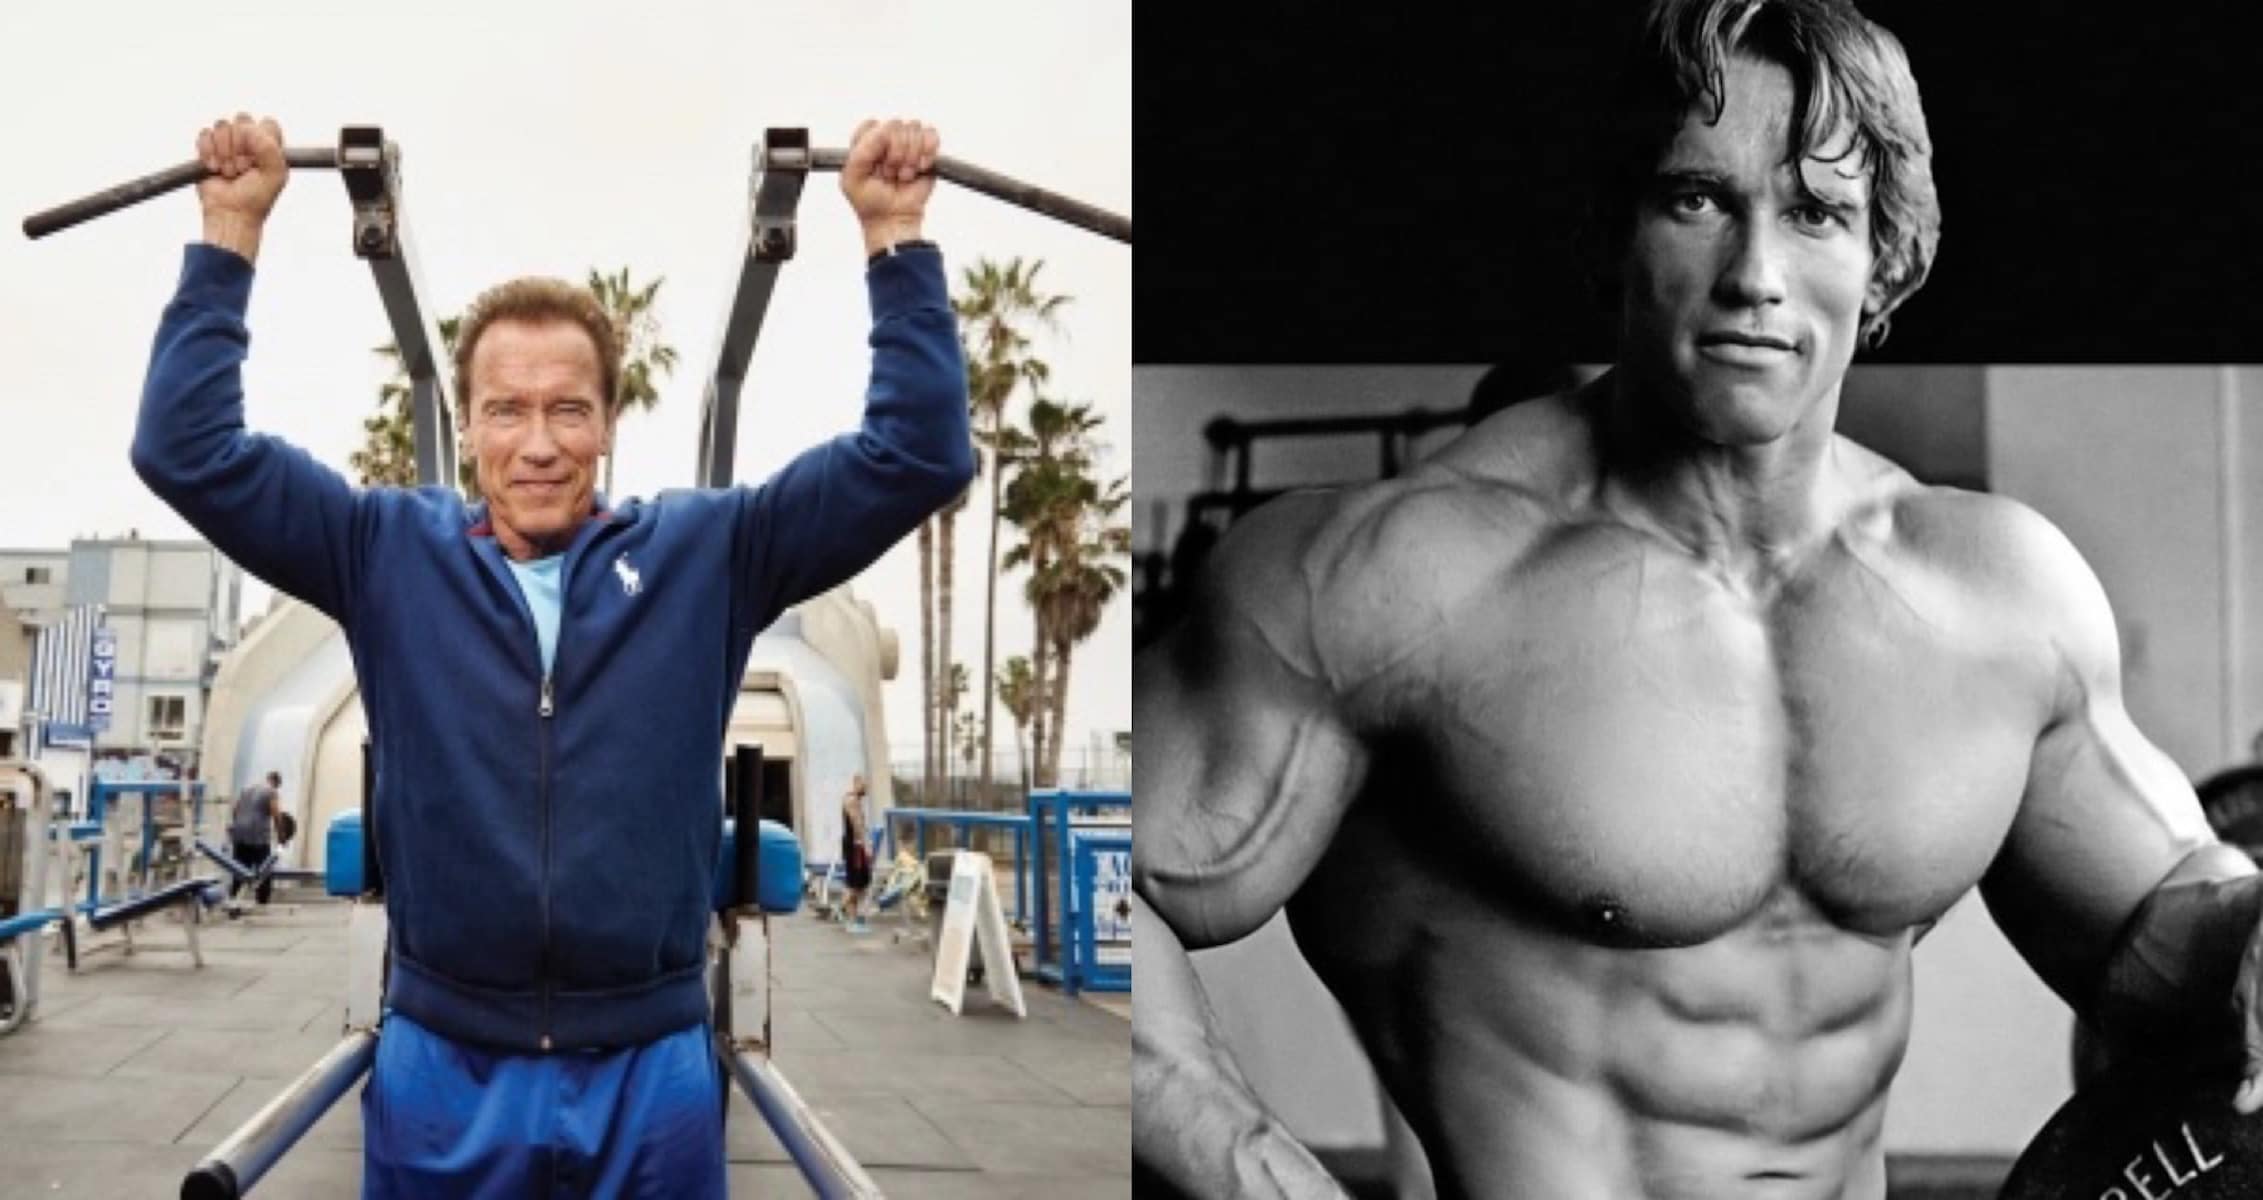 Arnold Schwarzenegger Gives Advice To Guide Anyone Getting Into Weightlifting